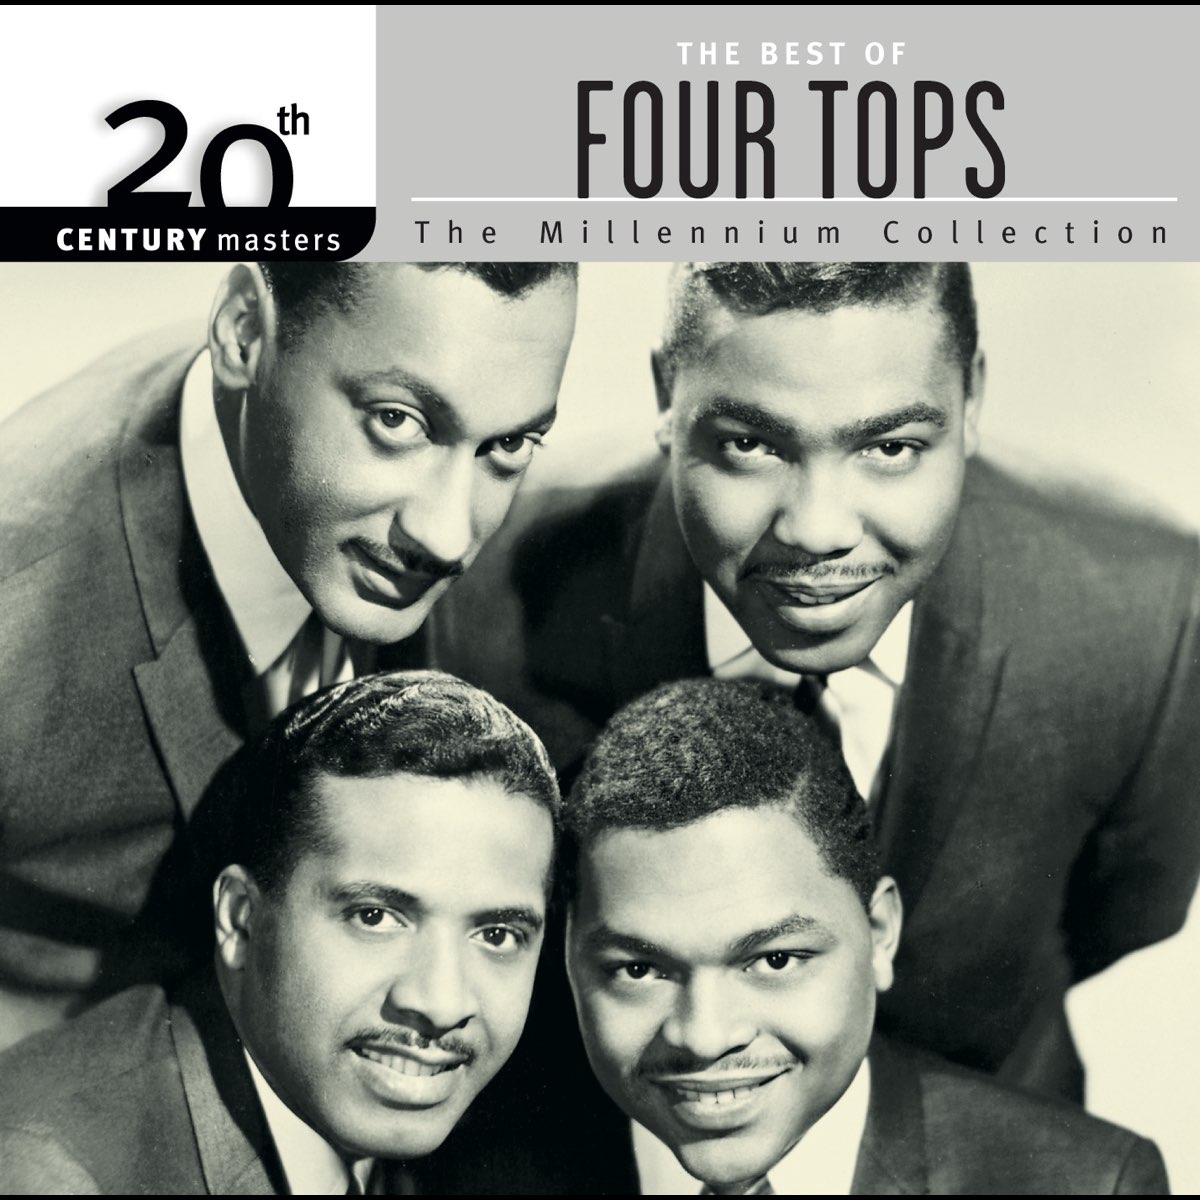 20th Century Masters - The Millennium Collection: The Best of Four by Four on Apple Music